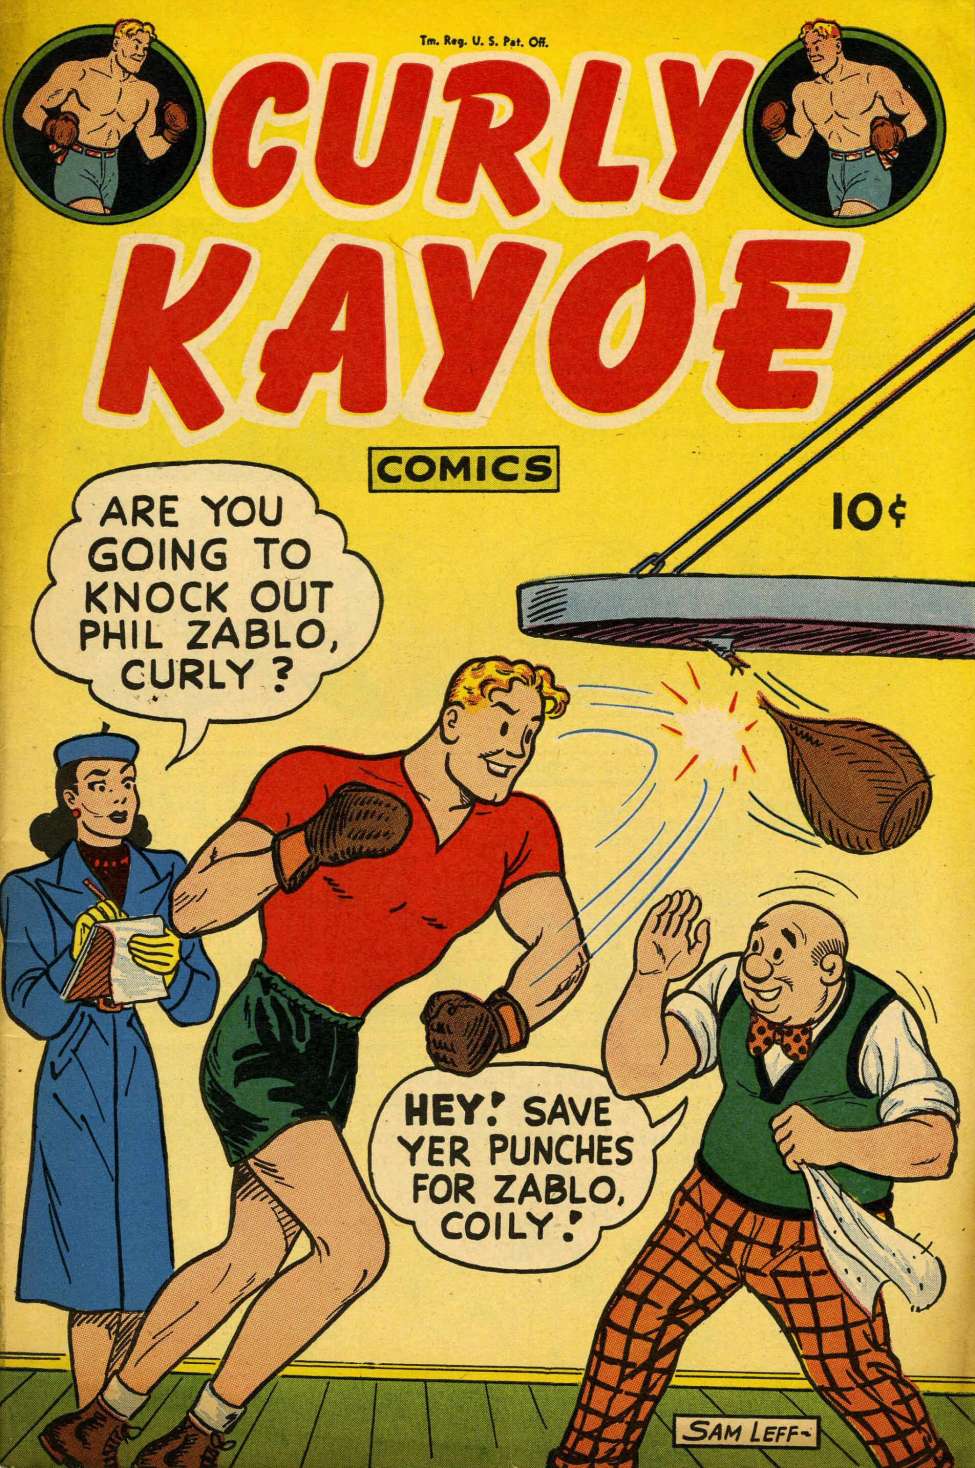 Book Cover For Curly Kayoe 2